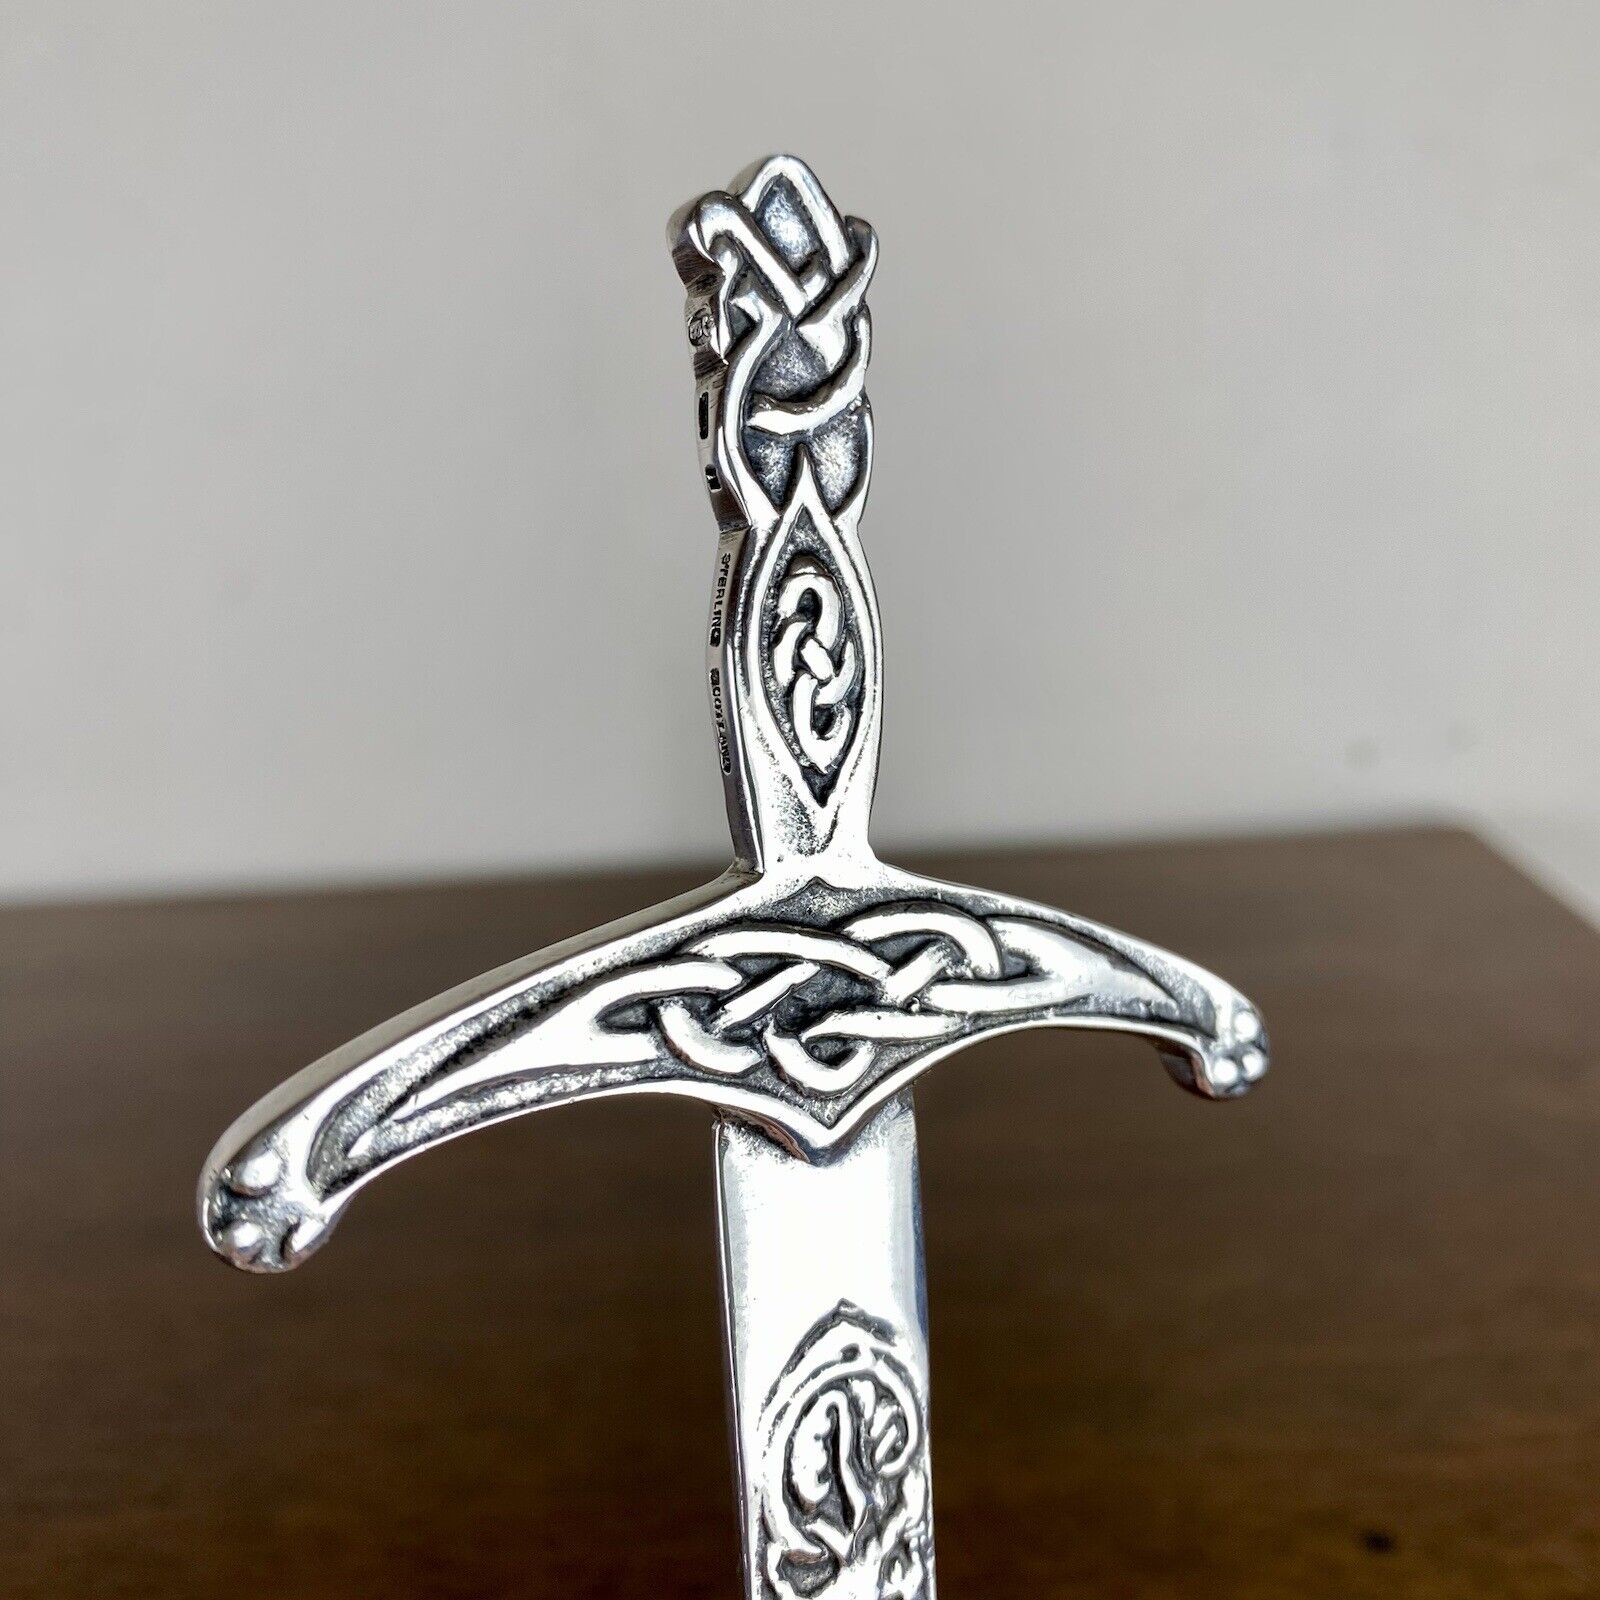 Antique Sterling Silver Double Sided Celtic Sword Letter Opener, Scotland Made